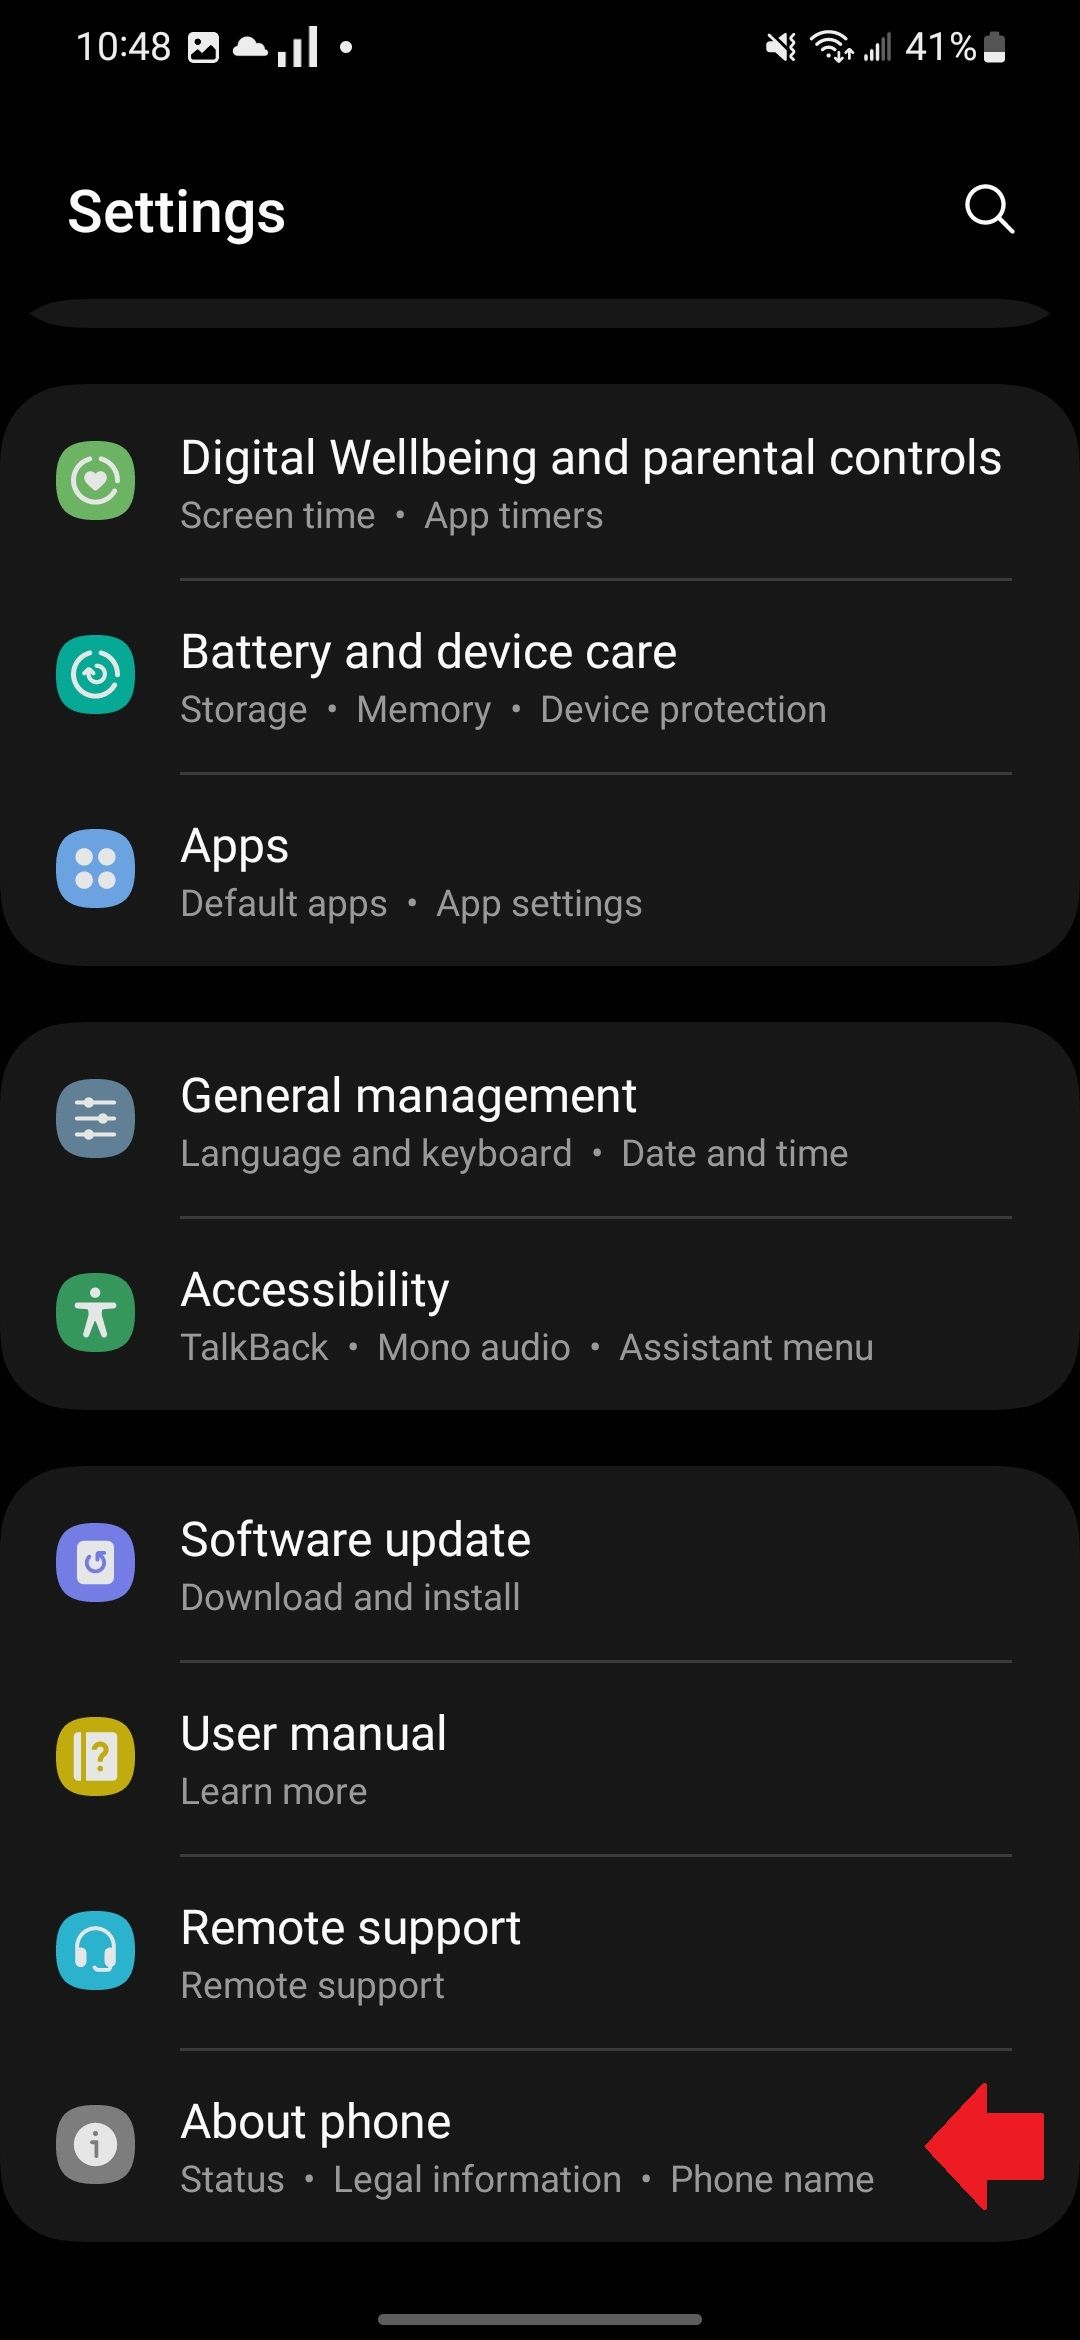 The Samsung Settings app with a red arrow pointing to the About phone section